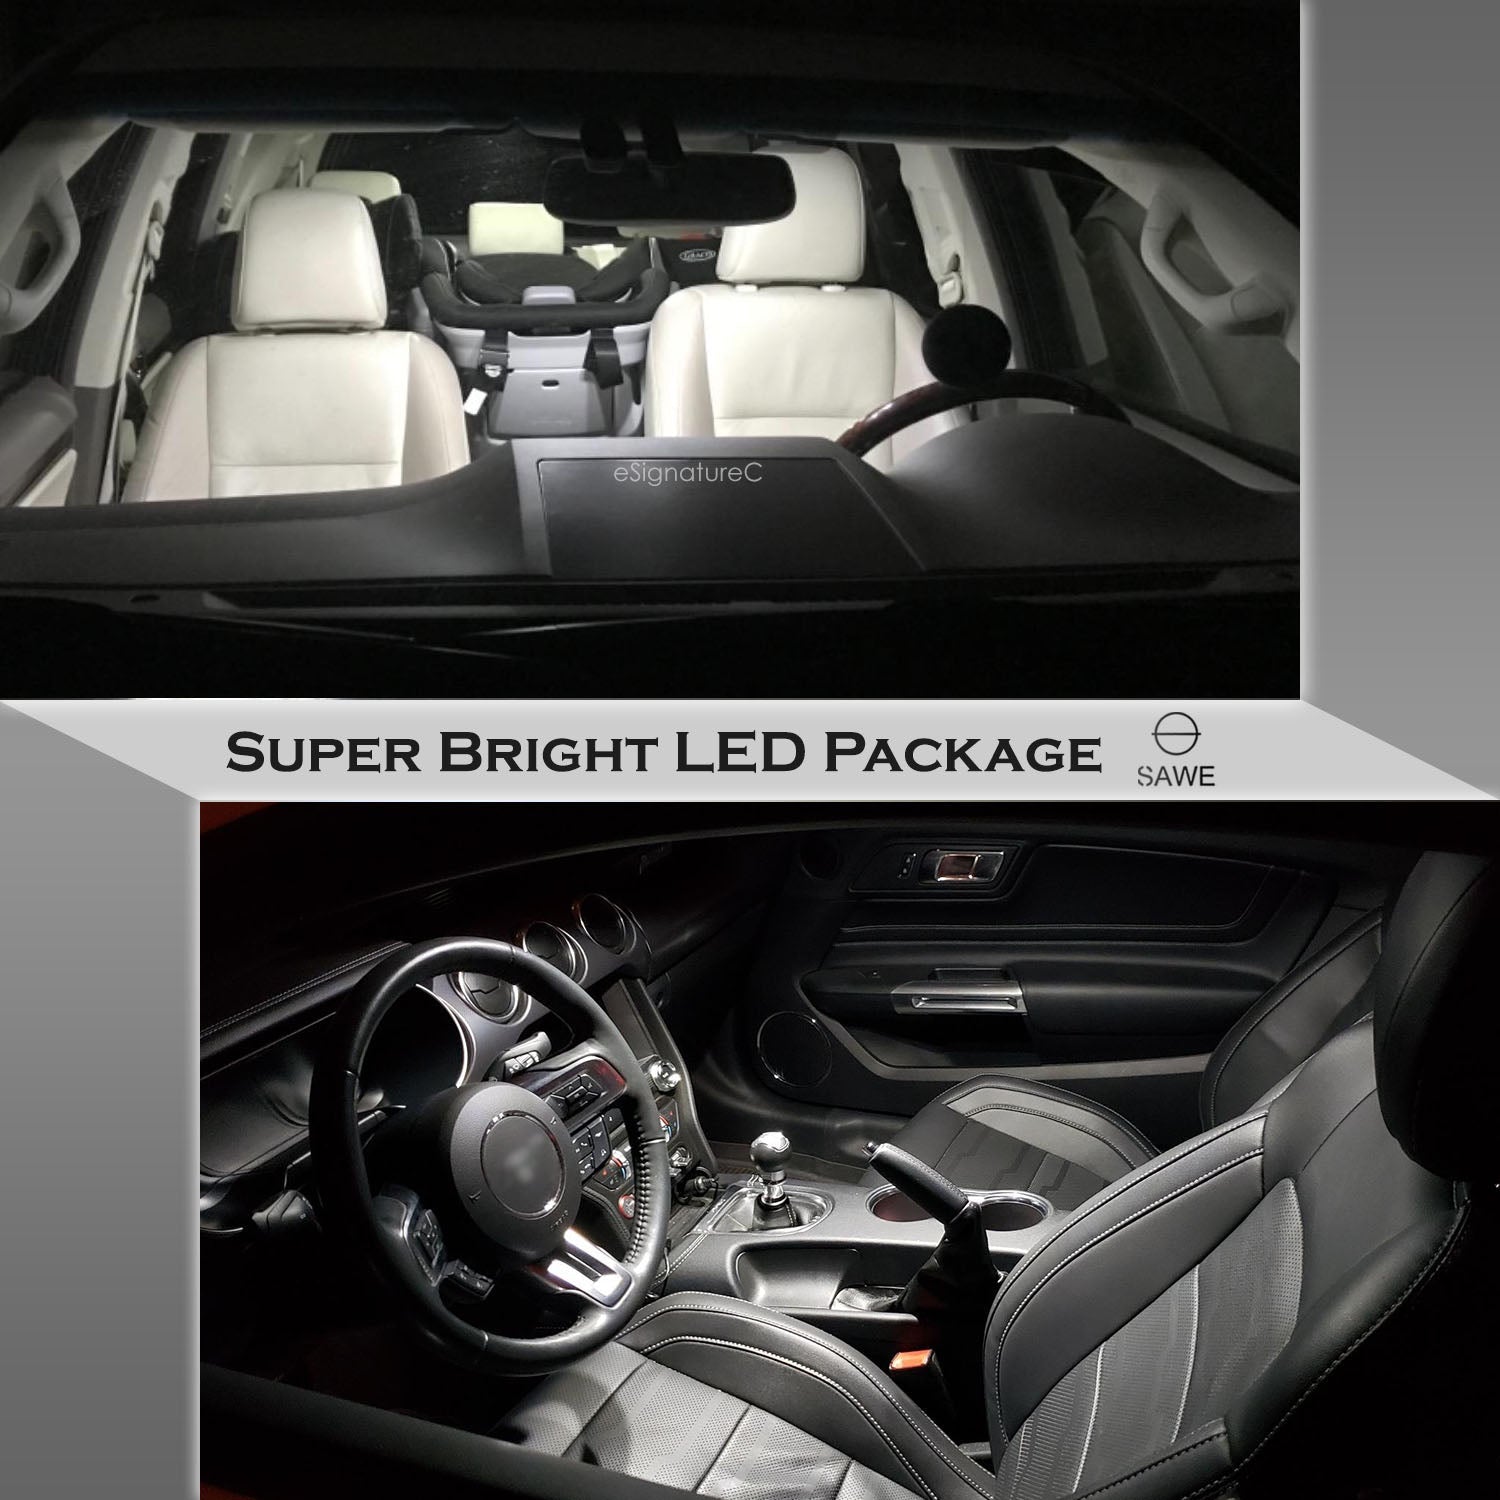 For Ford Mustang Interior LED Lights - Dome & Map Light Bulbs Package Kit for 2015 - 2018 - White